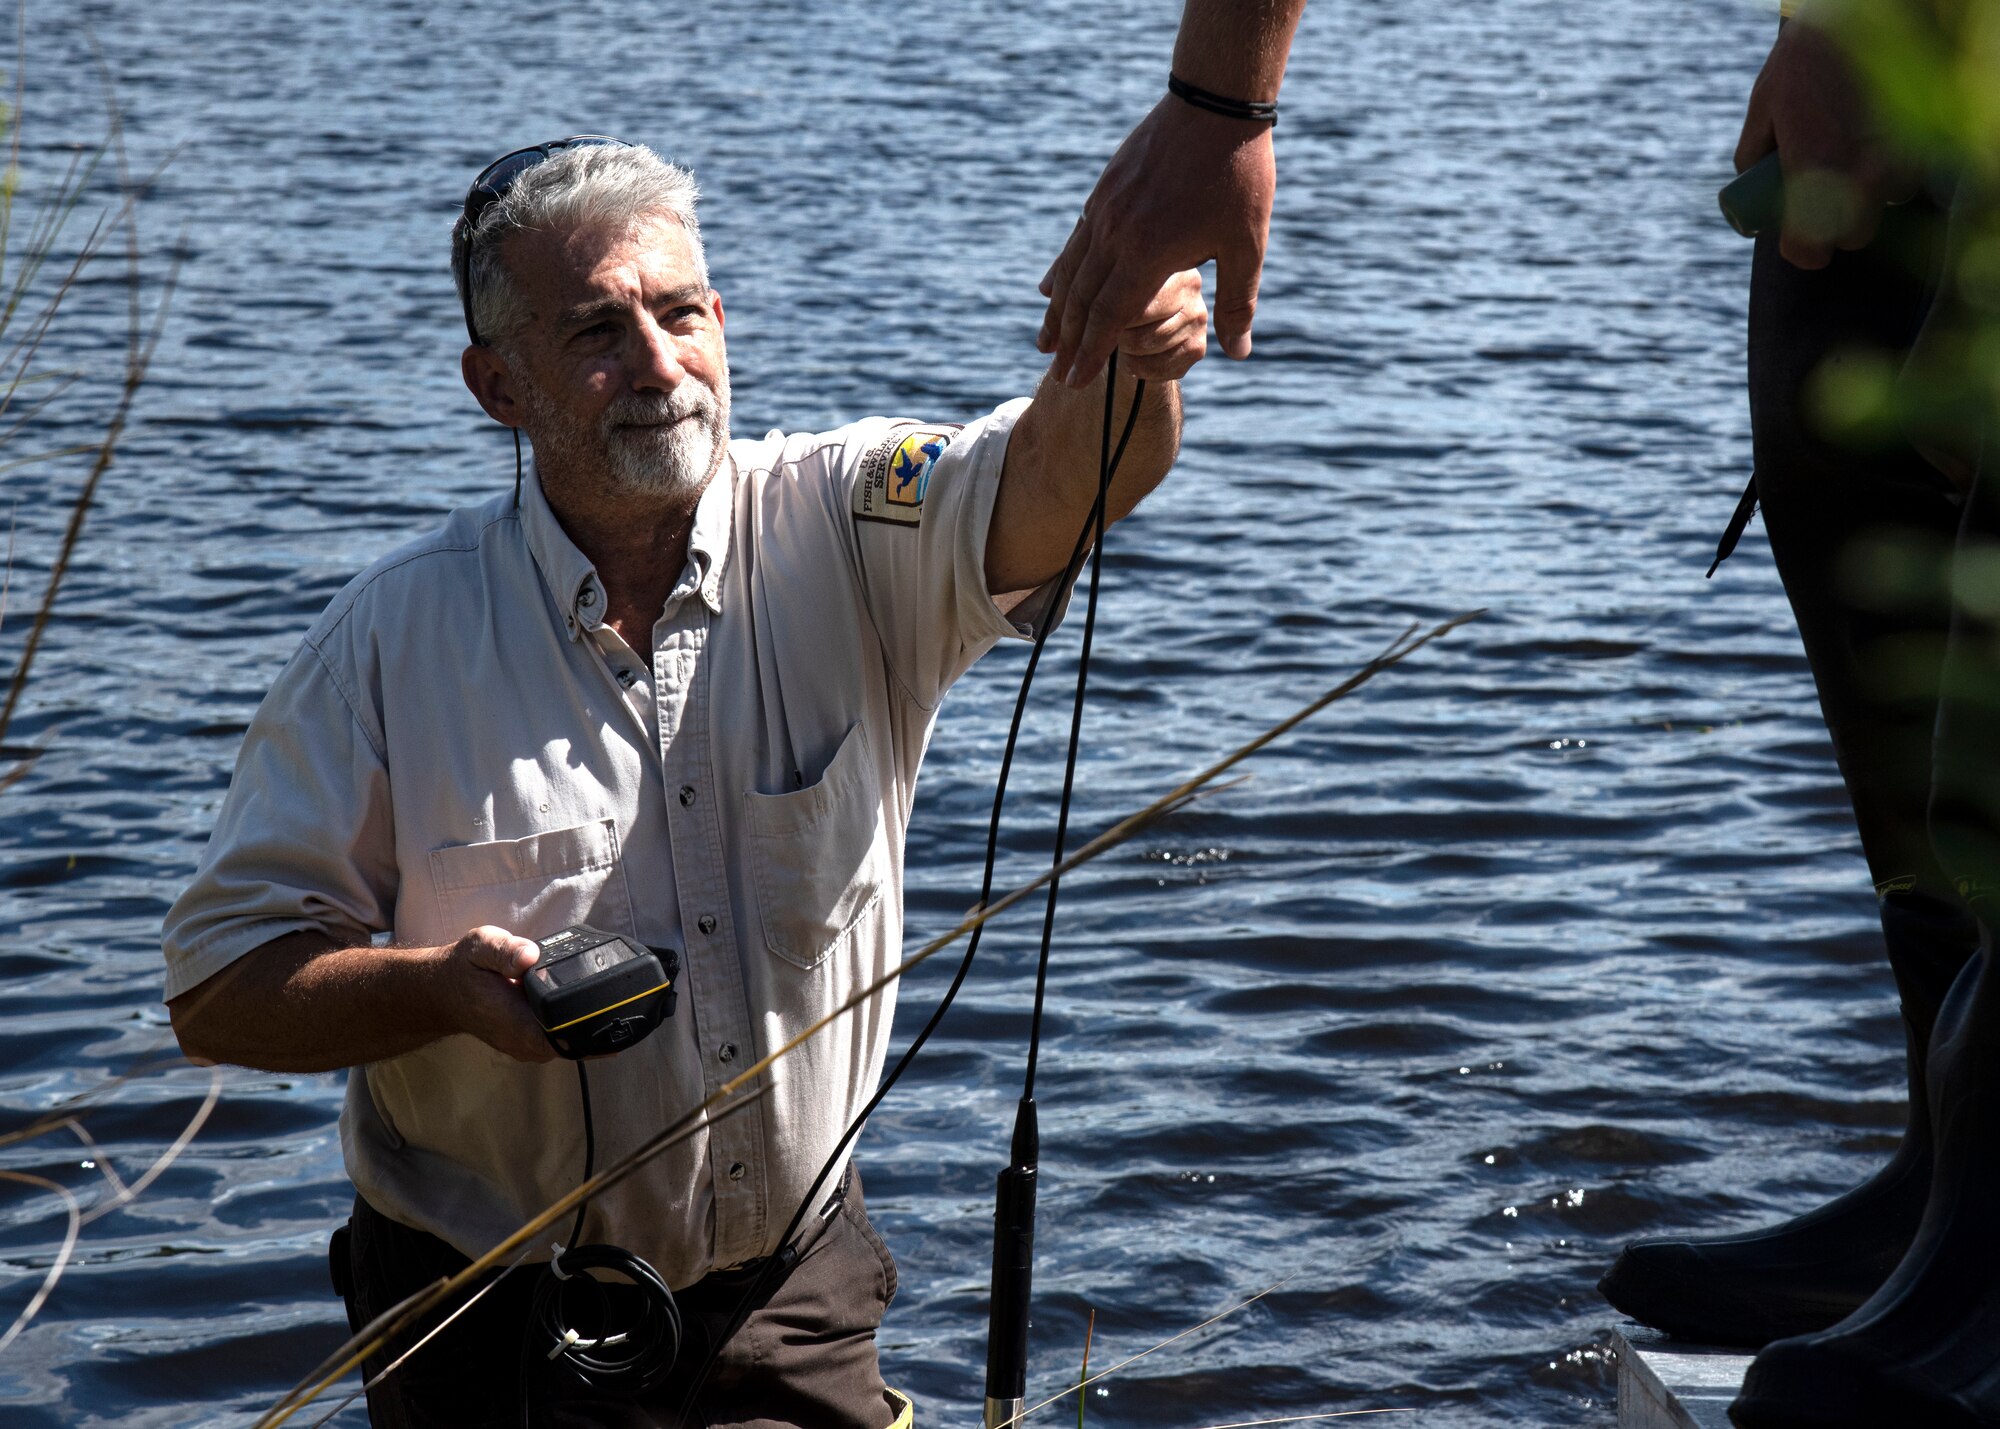 Ken Blick, the Welaka National Fish Hatchery project leader, hands off a ProSolo Digital Water Quality Meter at Lewis Lake on MacDill Air Force Base, Florida, Oct. 1, 2021.